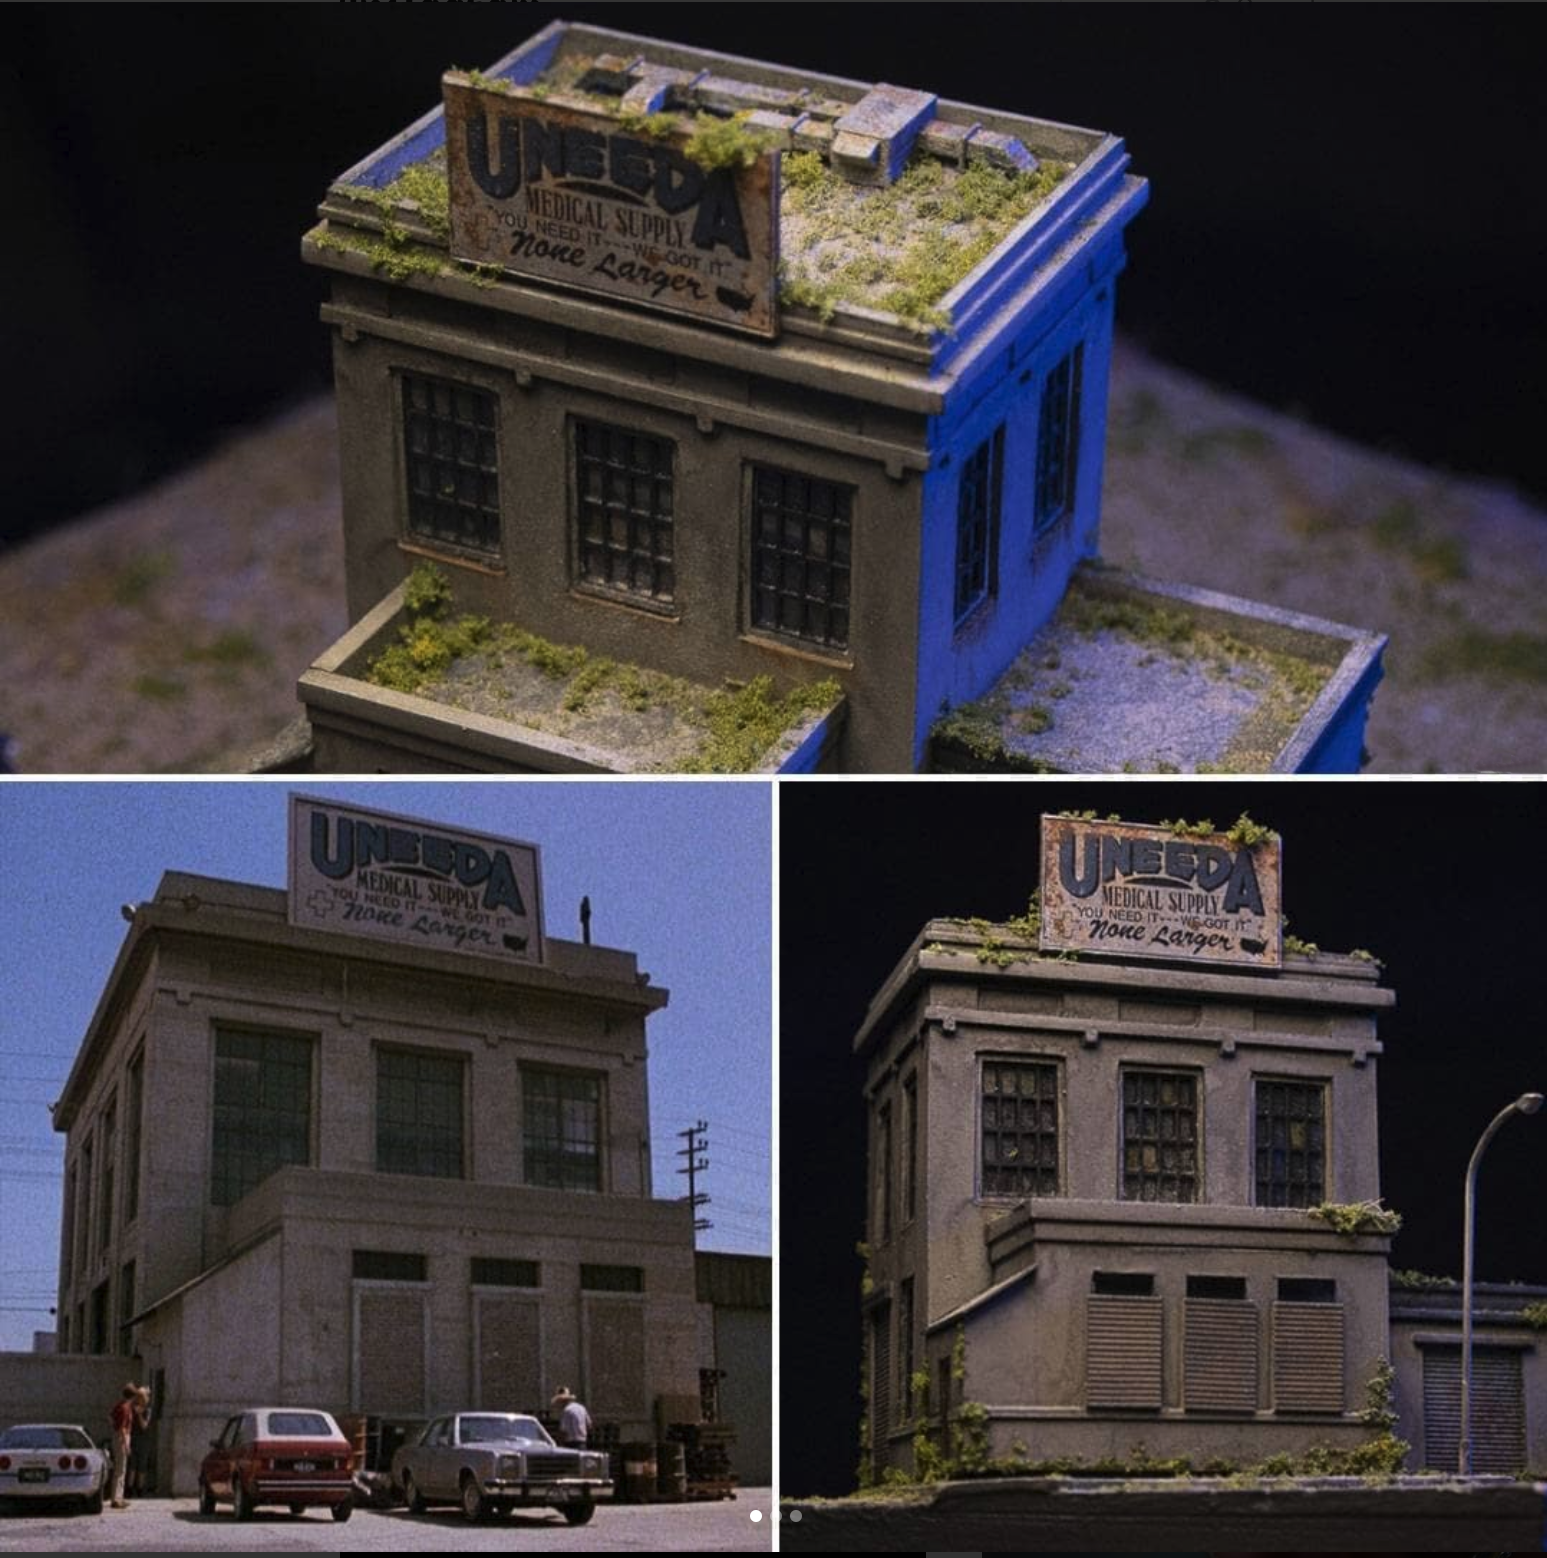 UNEEDA MEDICAL BUILDING Diorama from N Scale Dystopia